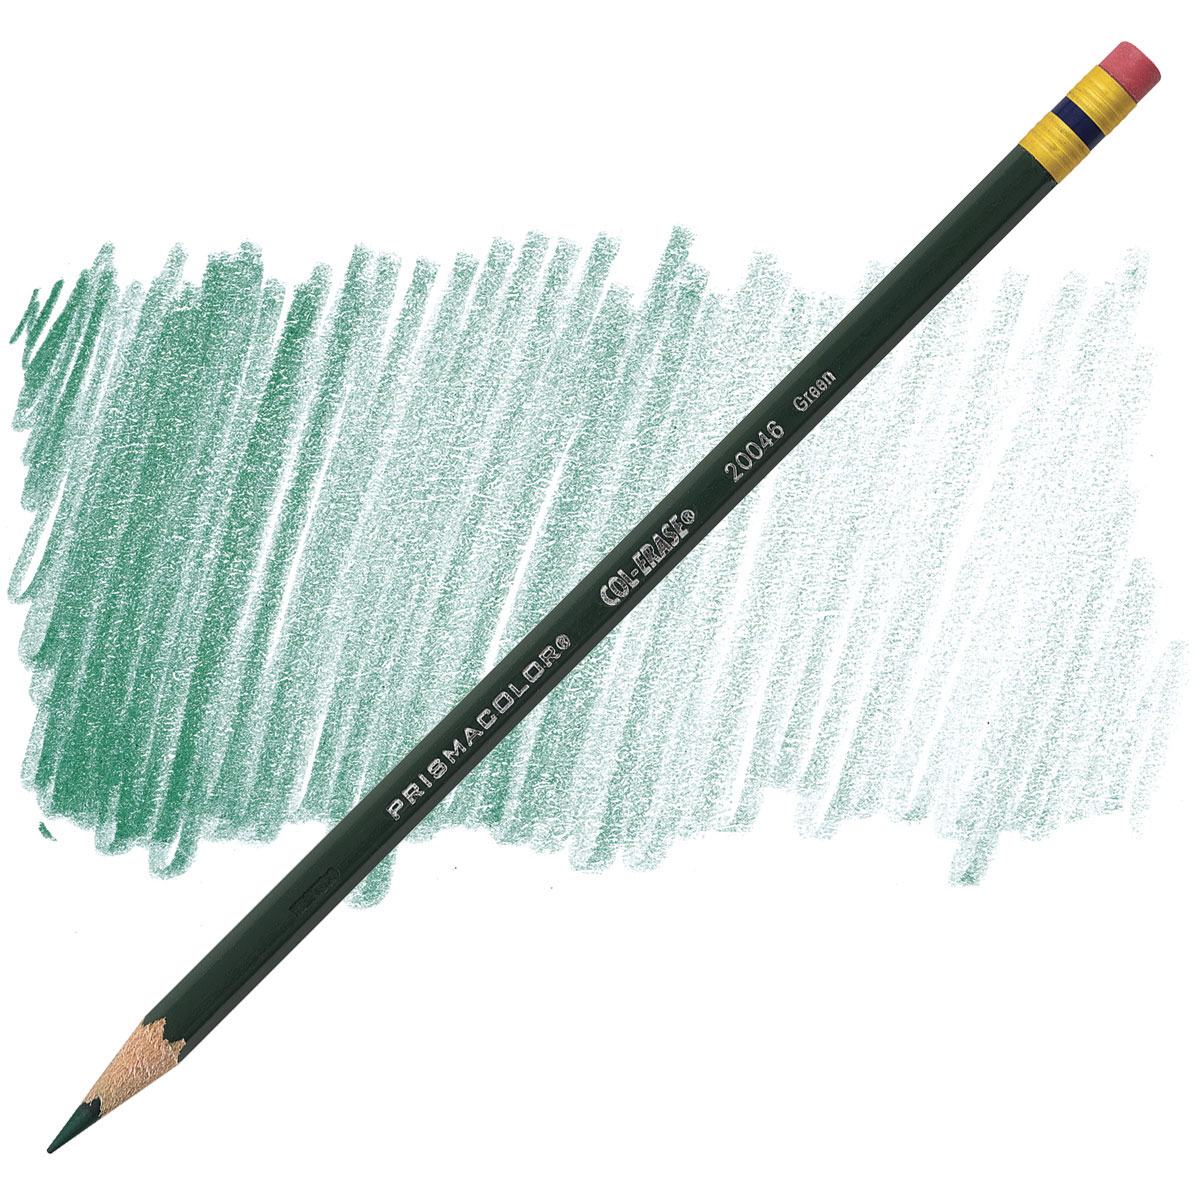  Prismacolor : Col-Erase Colored Woodcase Pencils w/Eraser, 12  Asstd Colors/set -:- Sold as 2 Packs of - 12 - / - Total of 24 Each : Wood  Colored Pencils : Arts, Crafts & Sewing